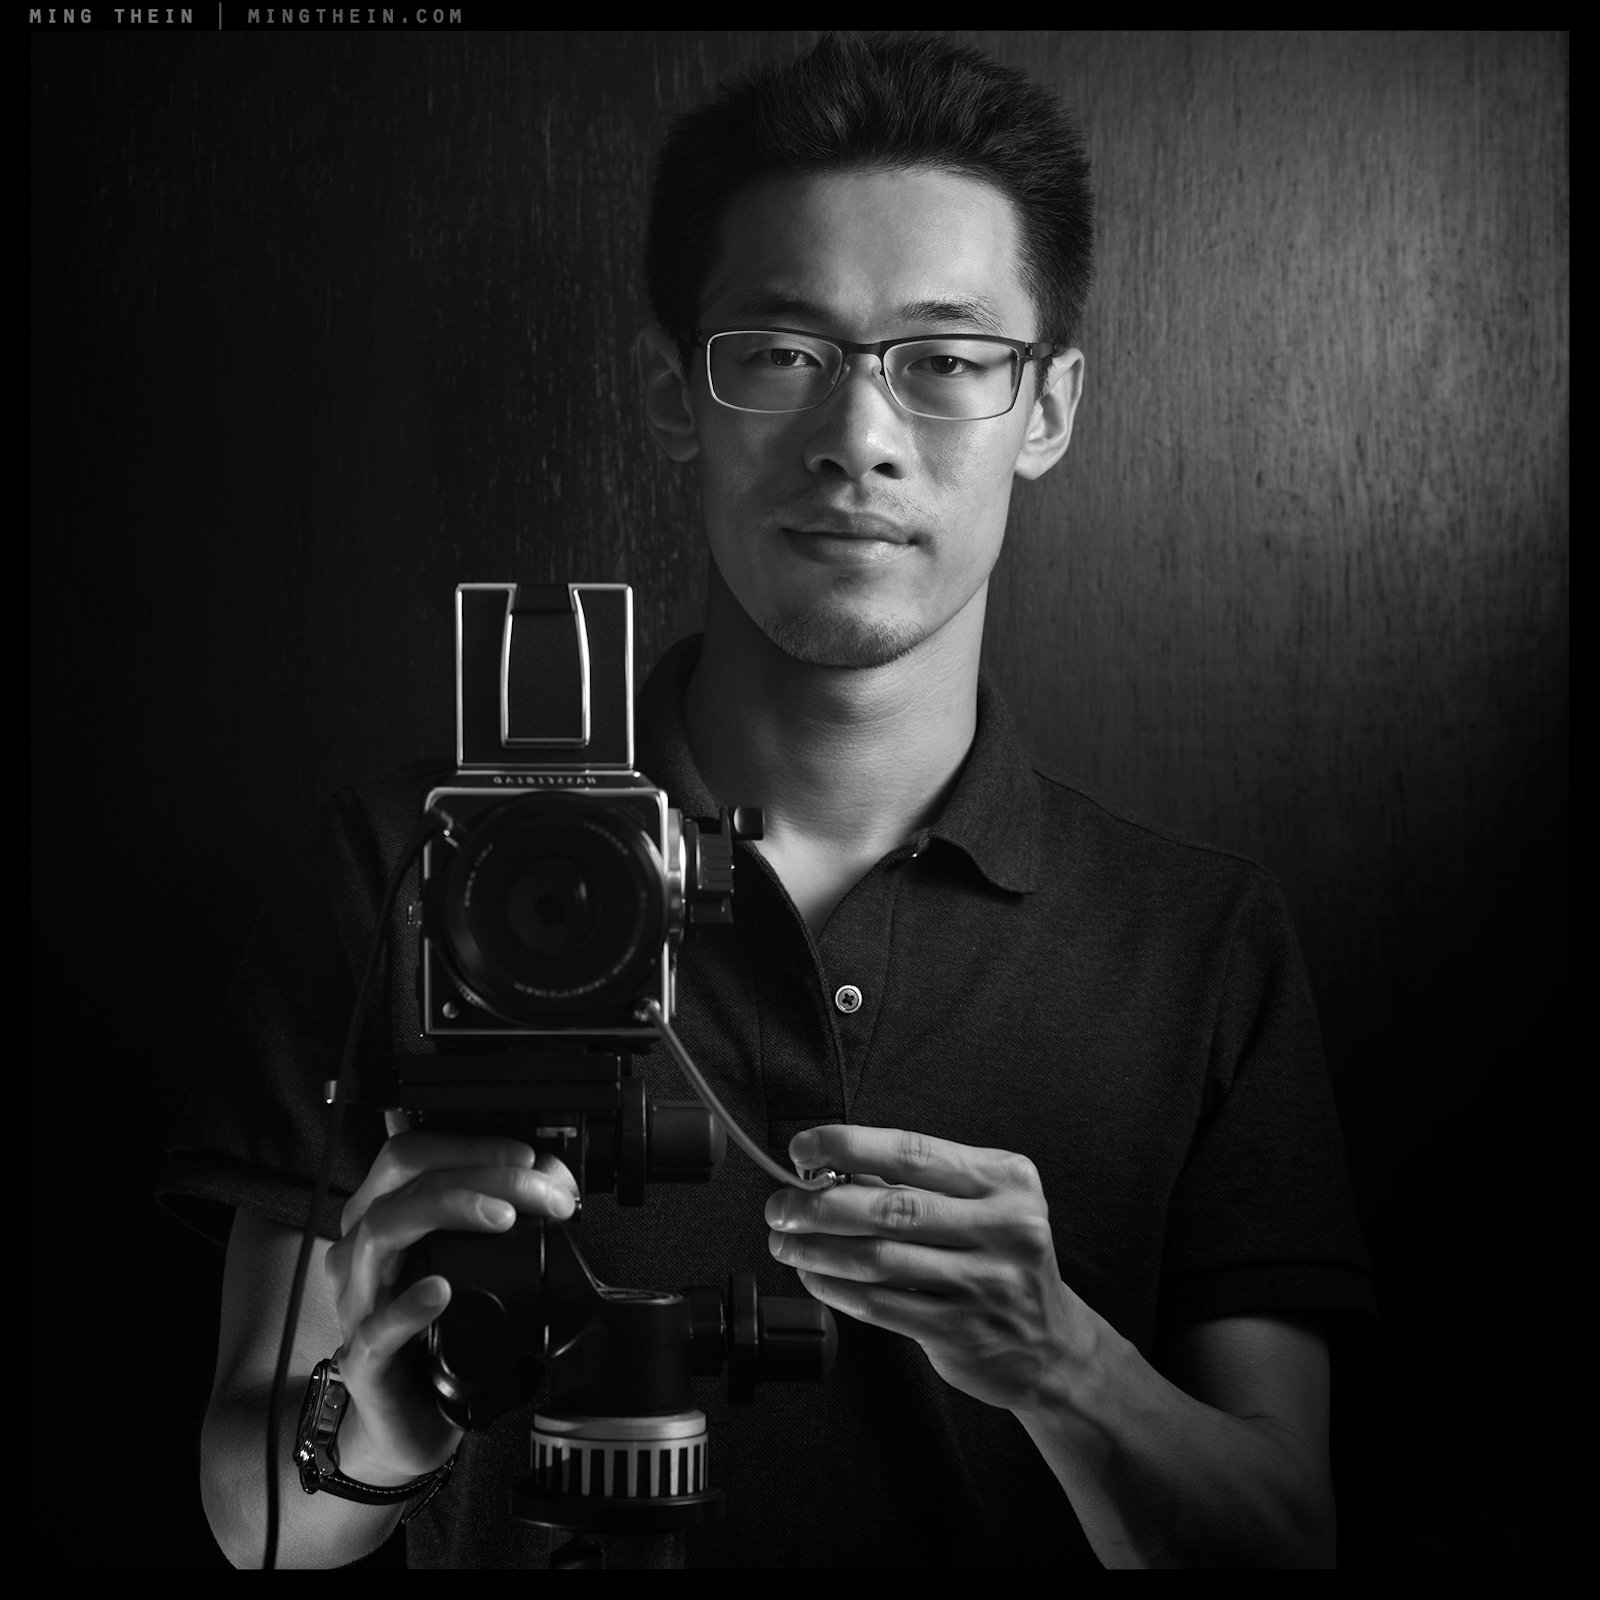 An Interview with with Ming Thein, the New Chief of Strategy for Hasselblad